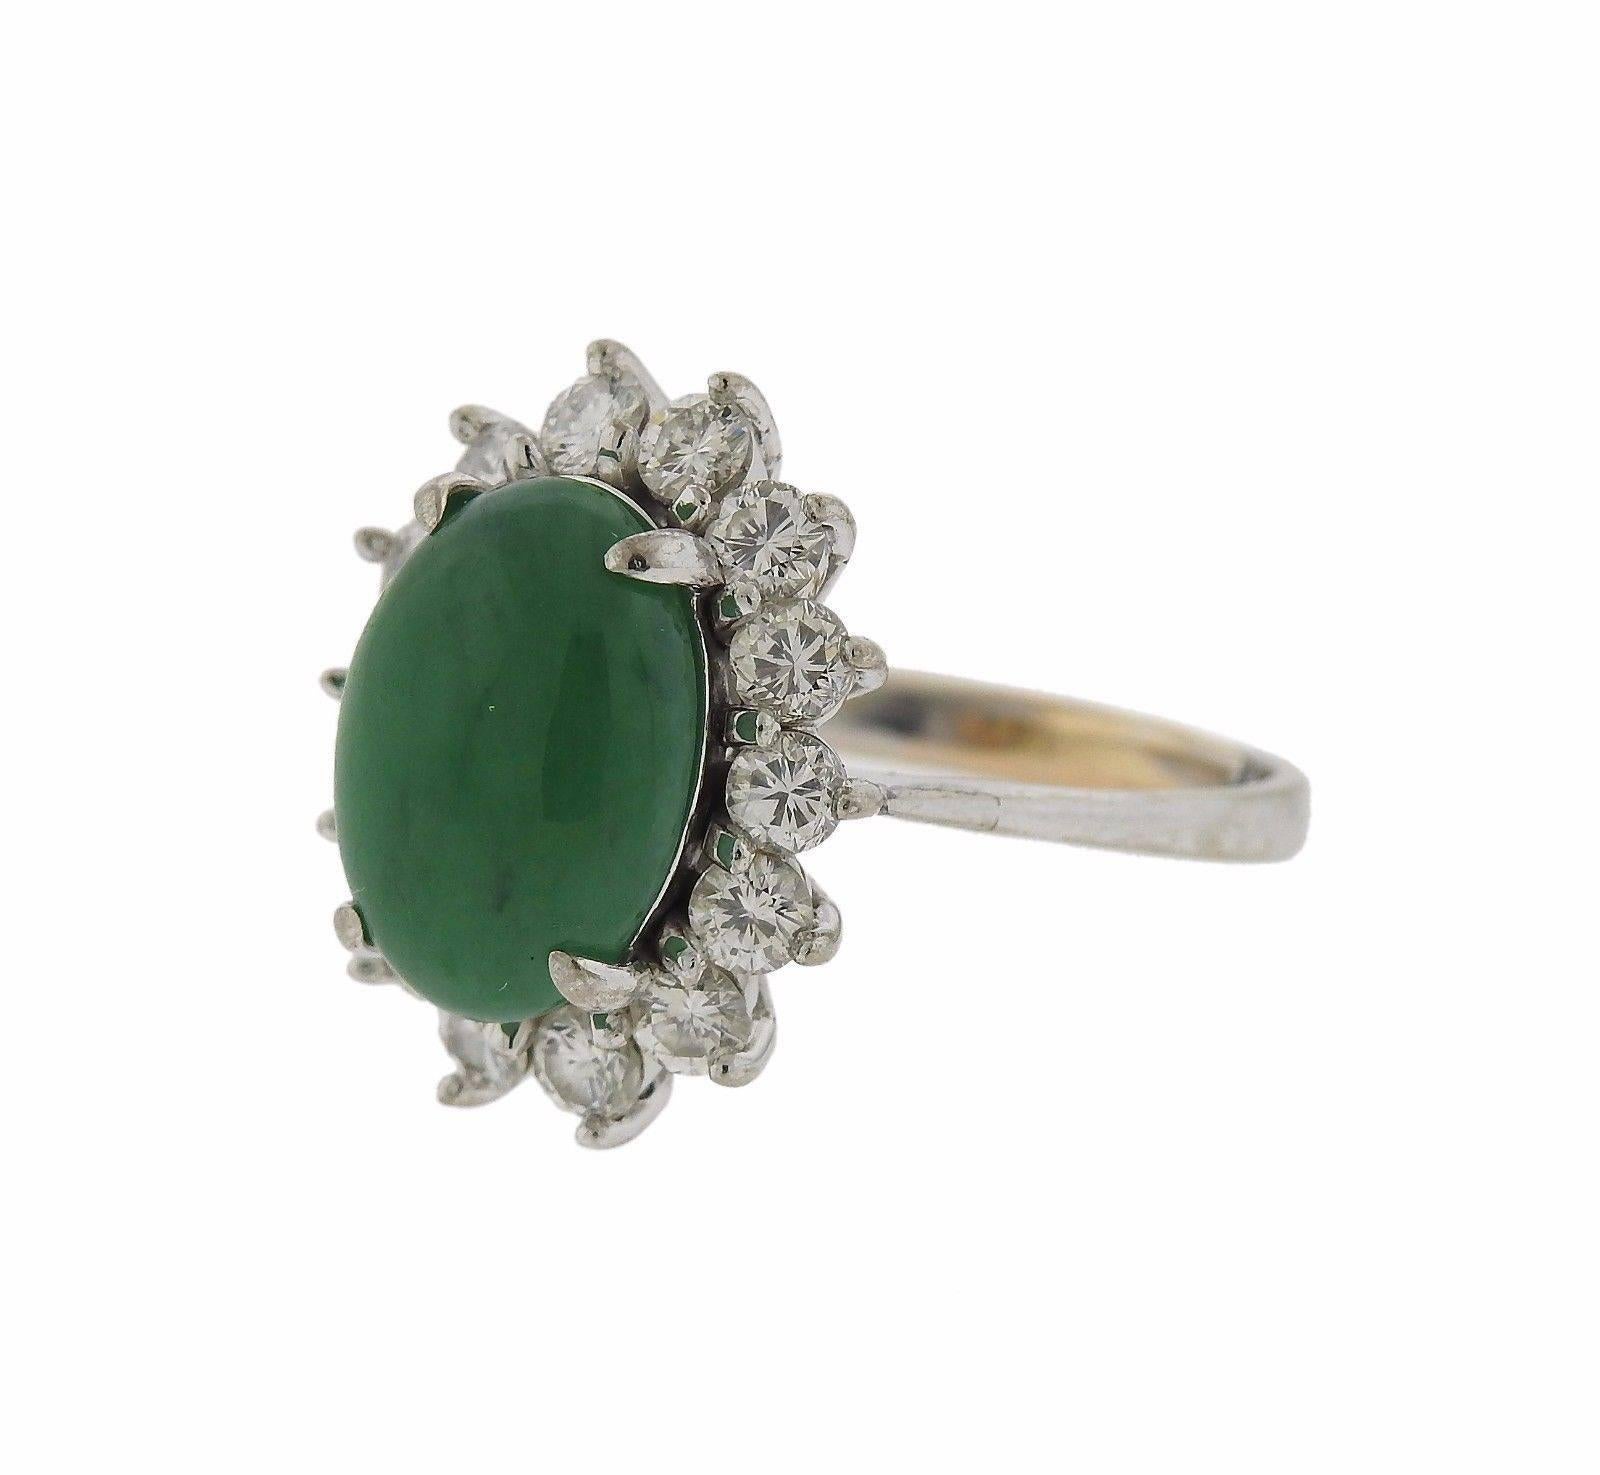 An 18k gold ring set with a natural color jadeite jade (12.81mm x 9.36mm x 5.02mm) and approximately 1 carat of G-H/VS diamonds.  The ring is a size 5 and the ring top measures 19mm x 15mm.  The weight of the piece is 6.5 grams.